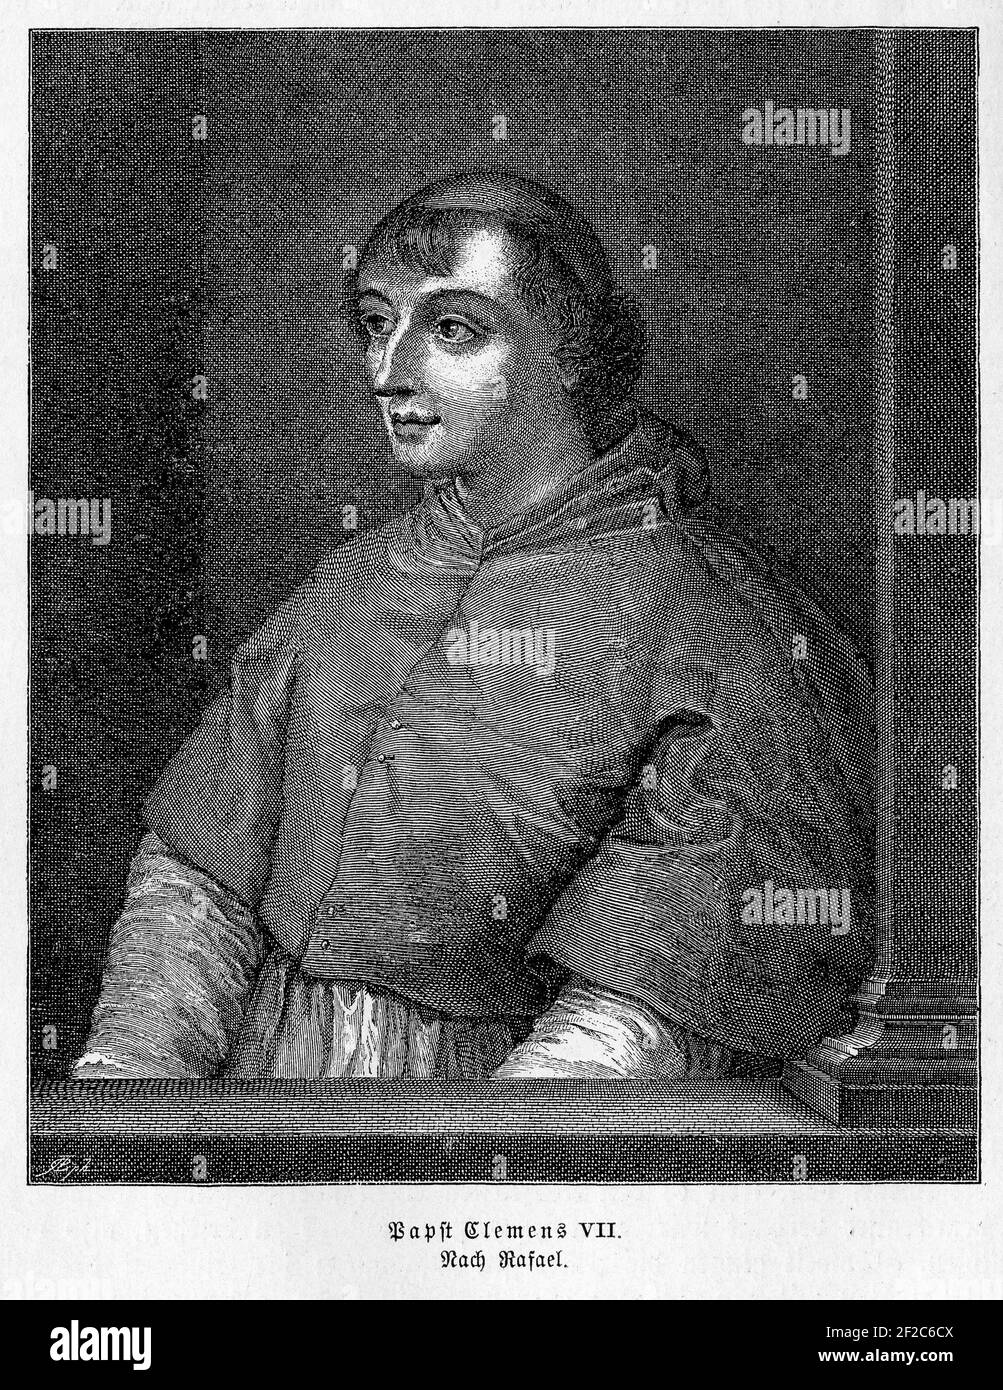 Pope Clement VII ( 1478 -  1534), born Giulio de' Medici,was pope in hard times with the Protestant Reformation spreading, the bankruptcy of the Church and foreign armies invading Italy, engraving portrait at young age from a painting by Rafael Stock Photo